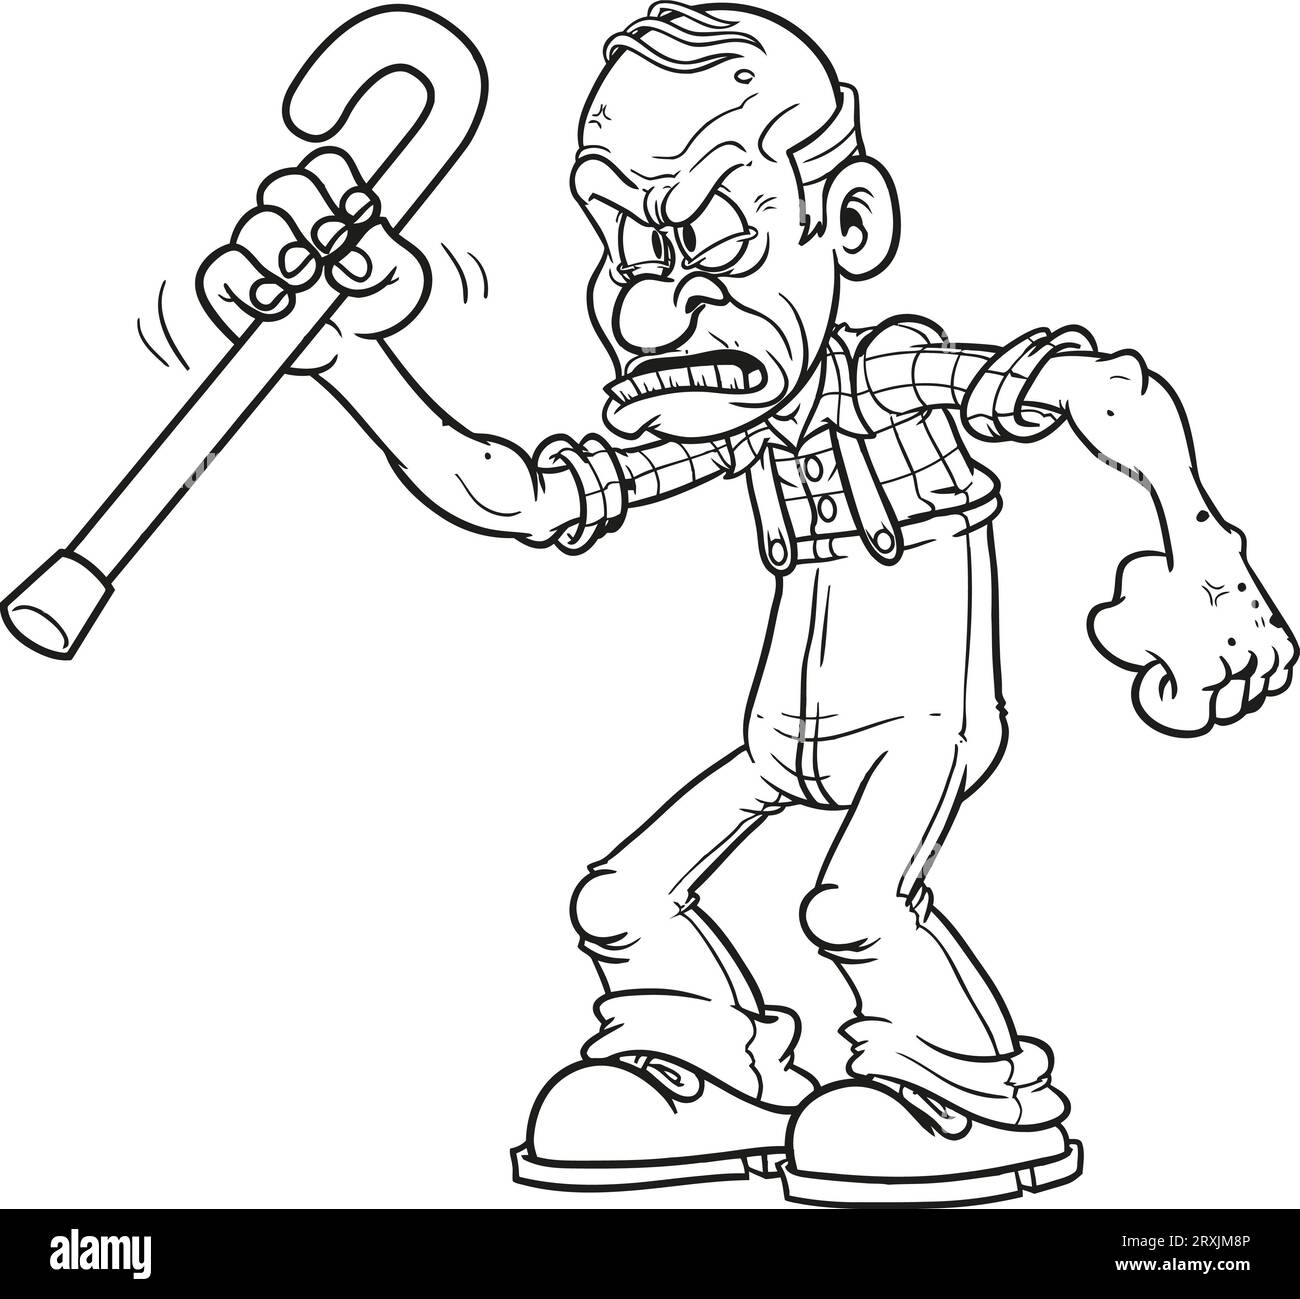 Grumpy old man Coloring pages for kids Stock Photo